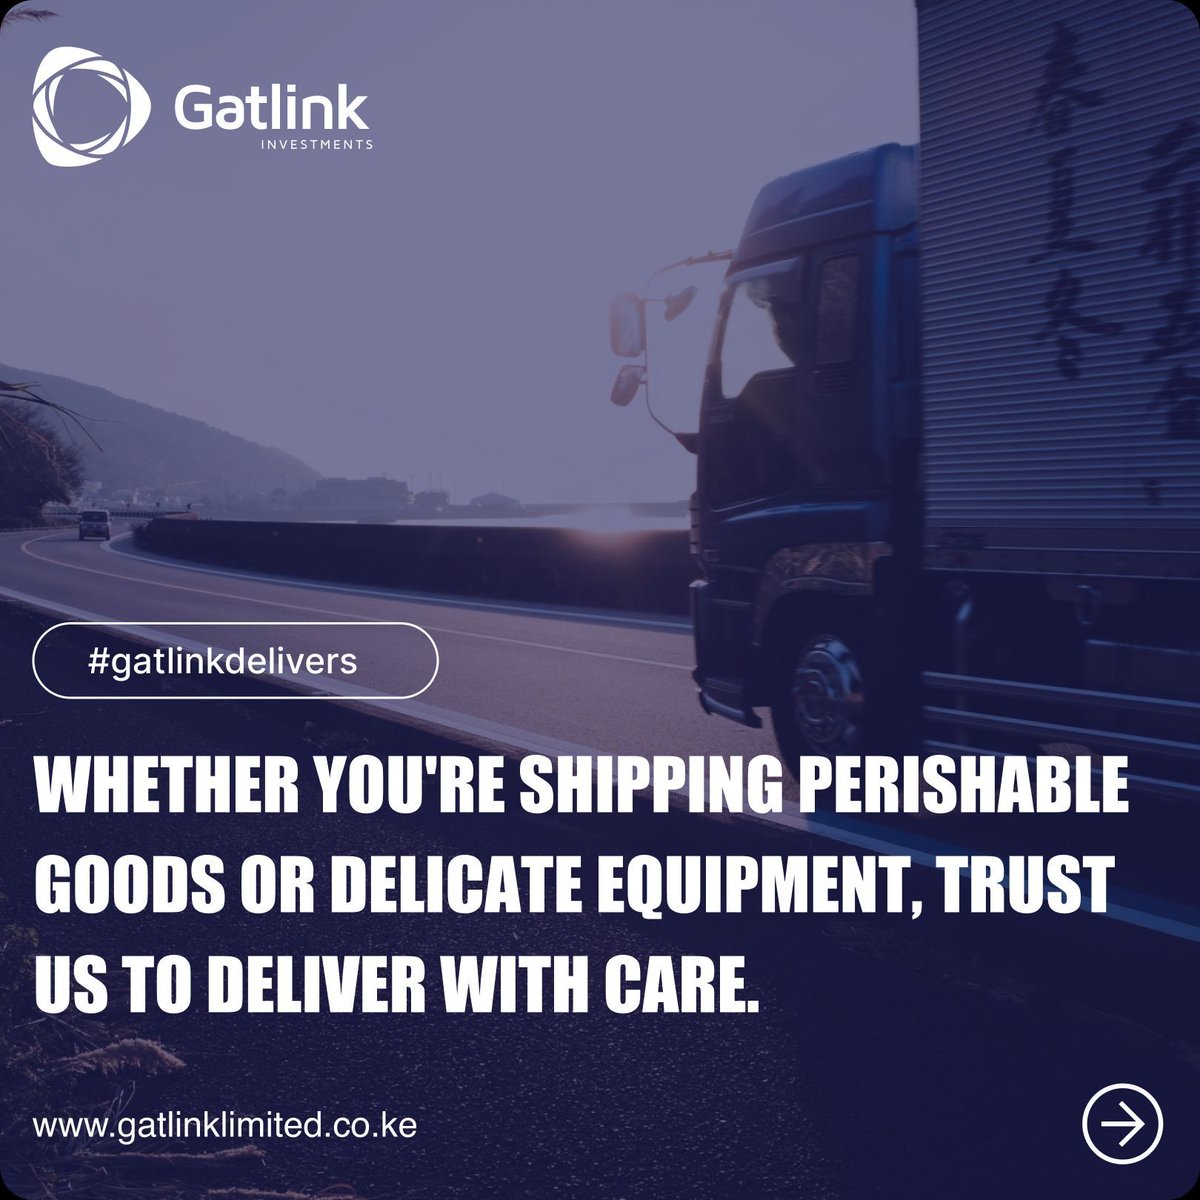 We prioritize your cargo's safety and security, employing advanced tracking systems and rigorous safety measures.

We are all about minimum risks, talk to us info@gatlinkinvestments.co.ke

#gatlinkinvestments #seacargoshipping #freightservices #kenya #rwanda #drcongo #africa